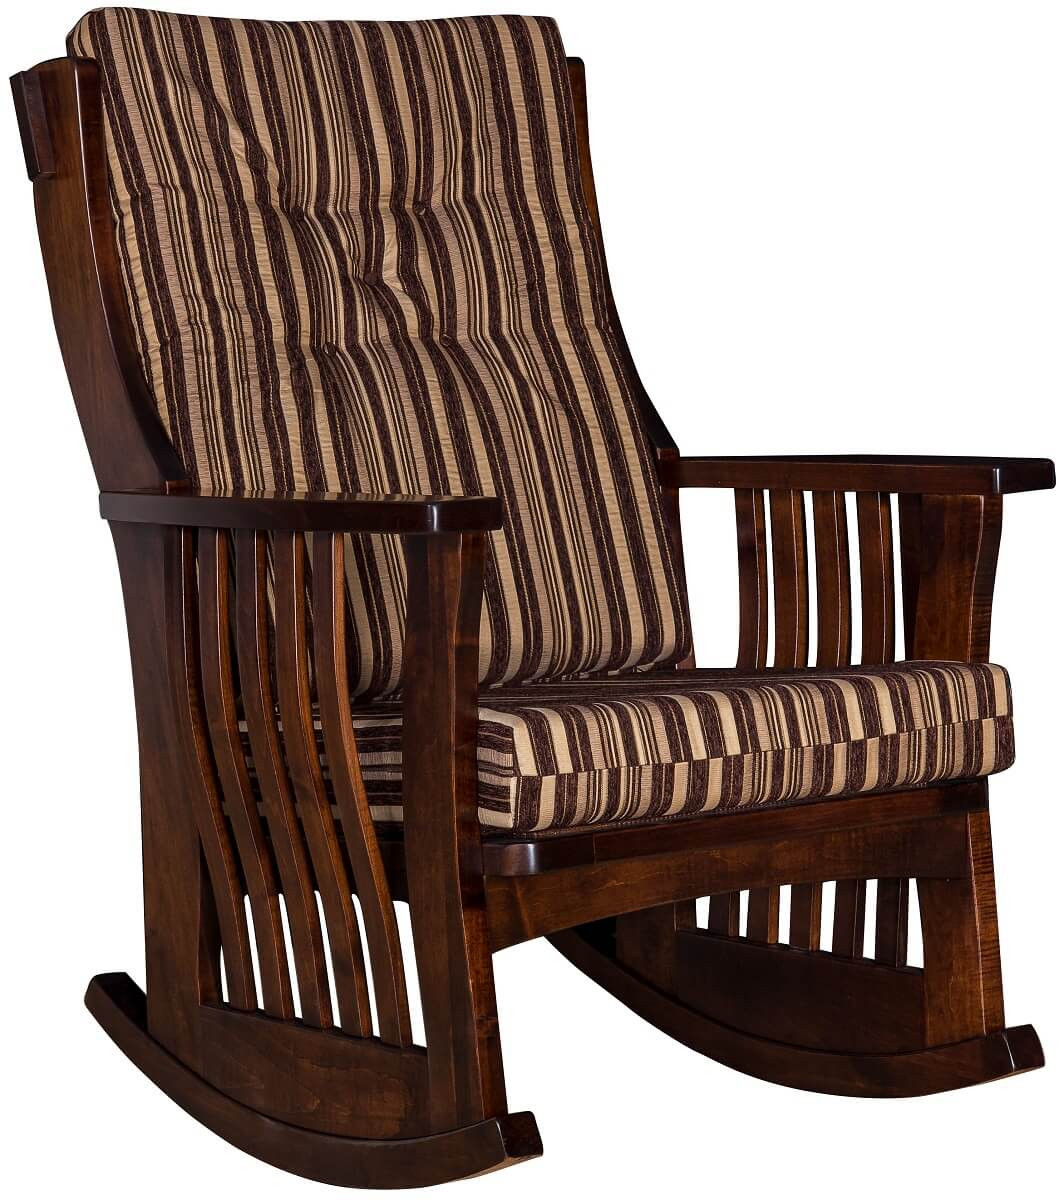 Brown Maple Rocking Chair with Cushions